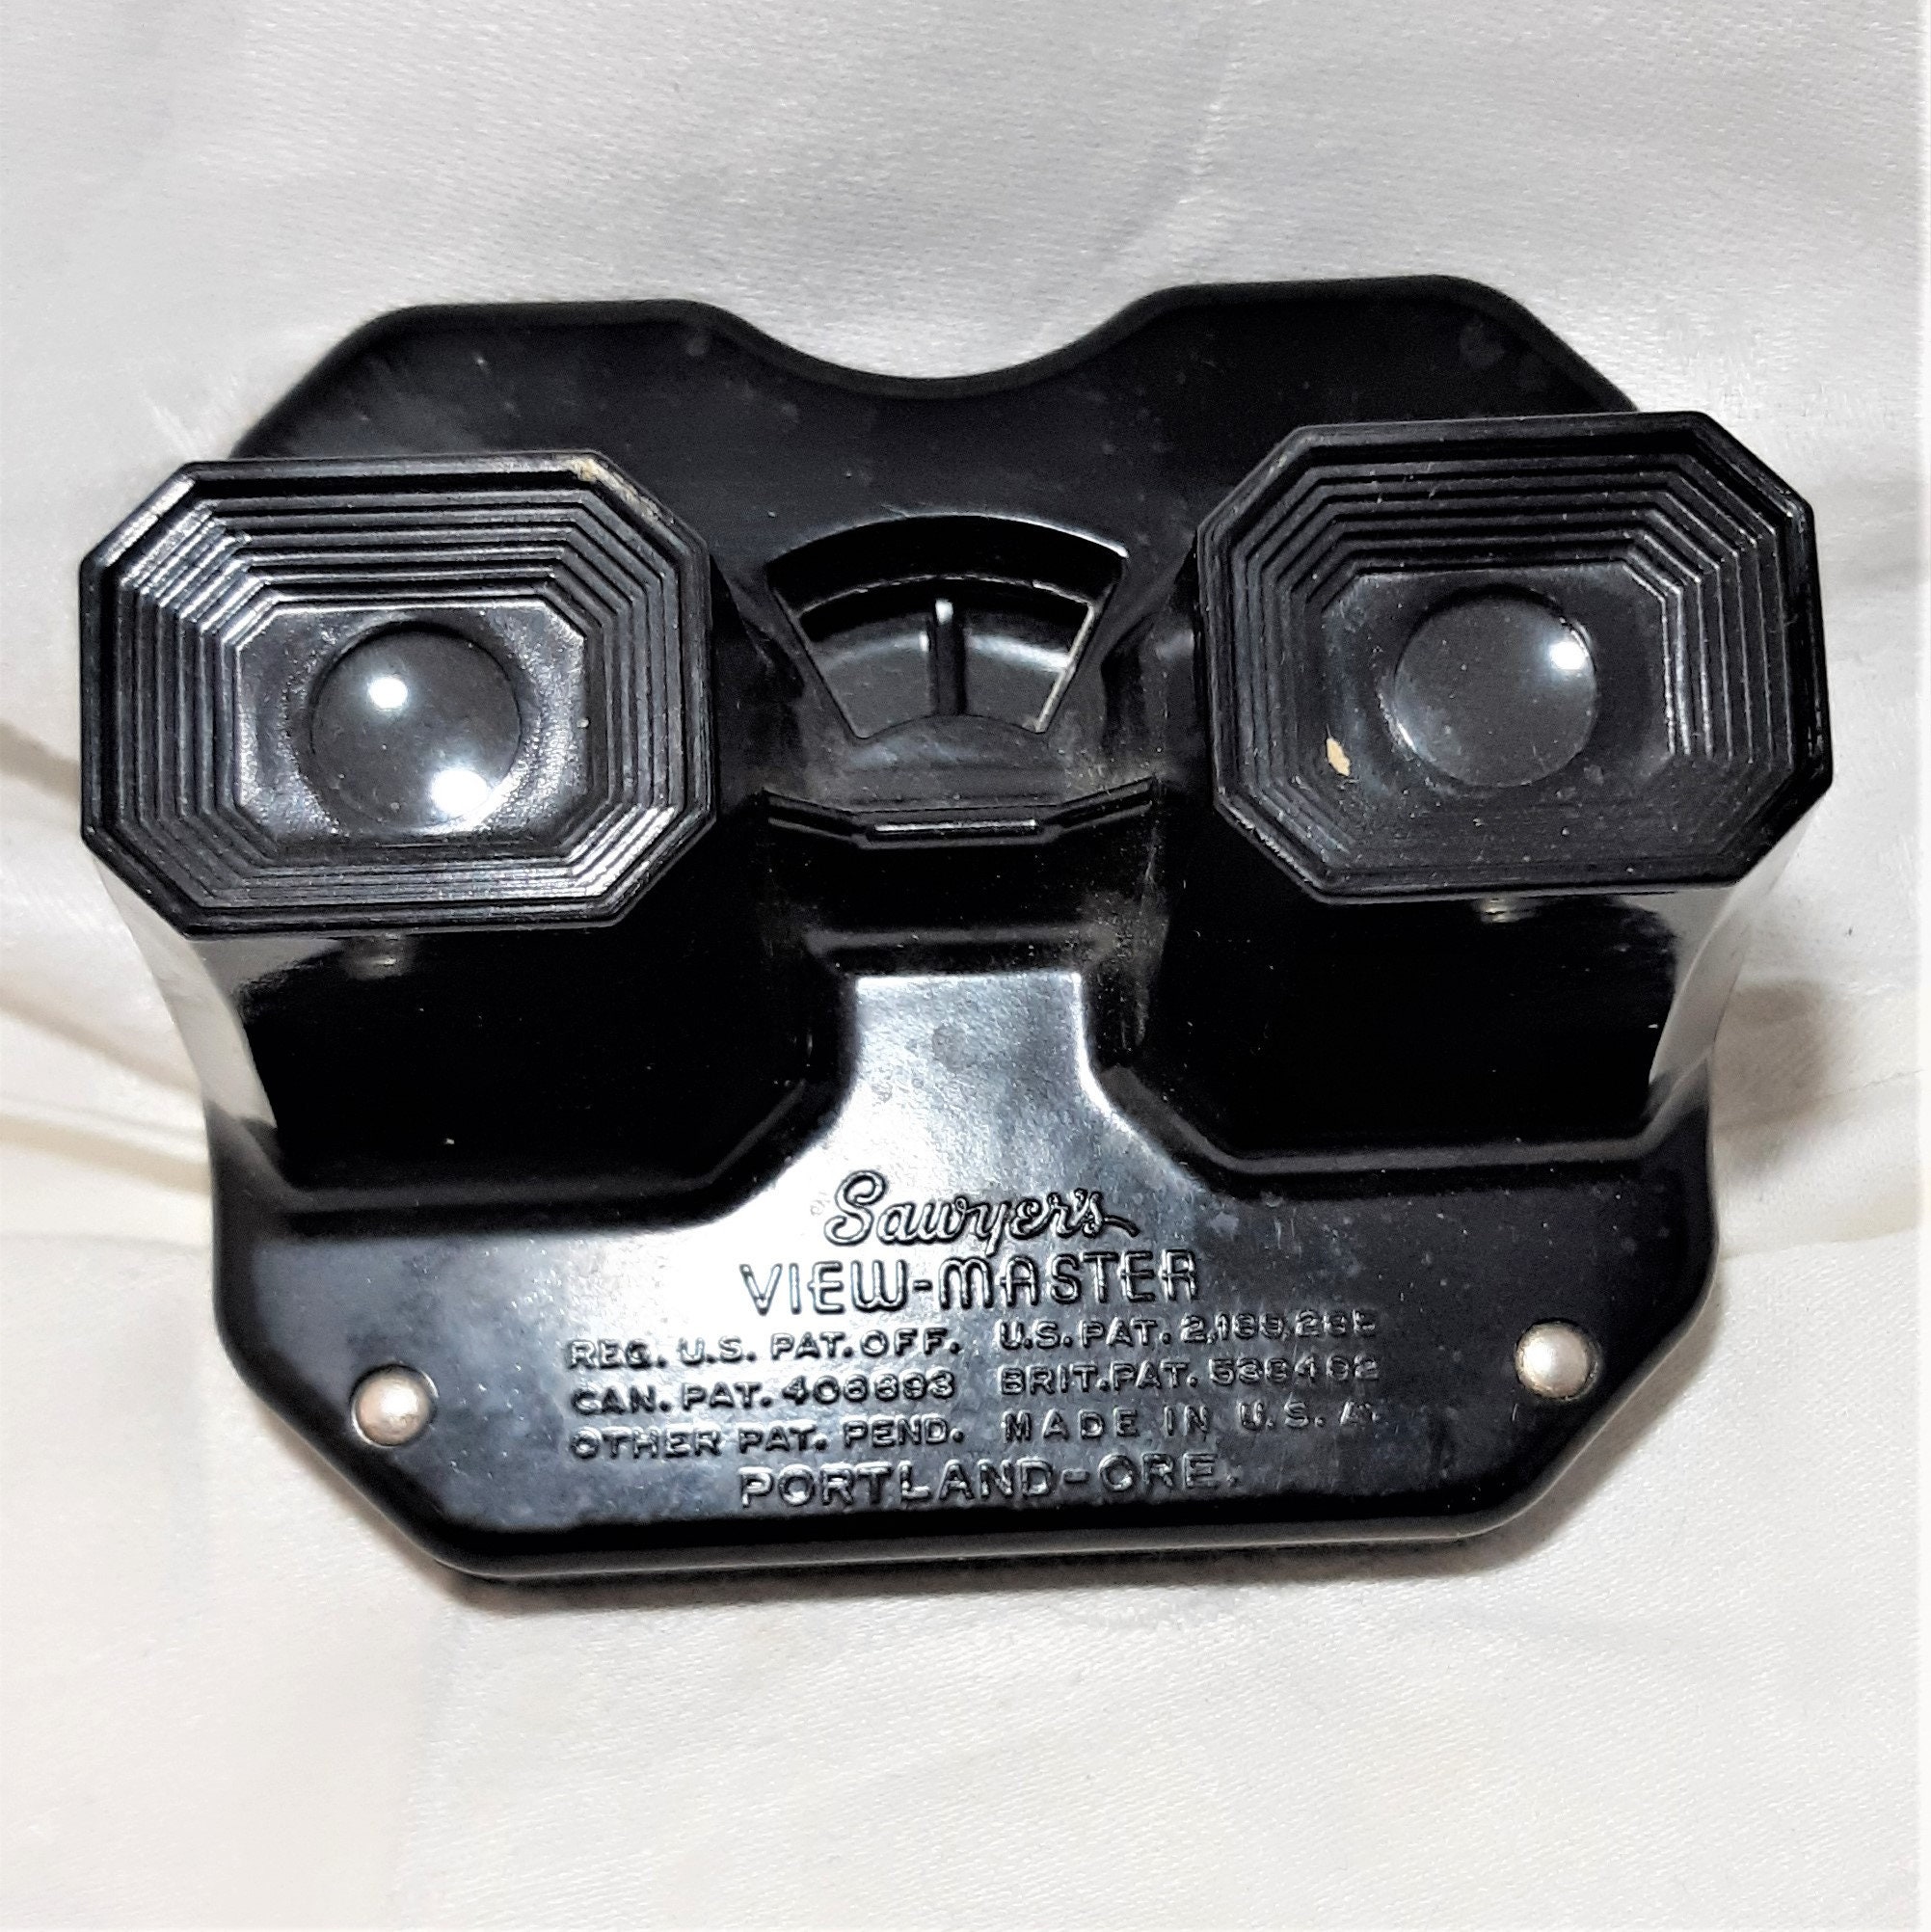 Vintage Bakelite Sawyers View-master. Black Stereoscope Story Reel Viewer.  Early Viewmaster in Hard Early Plastic. Early Story-telling Toy. 